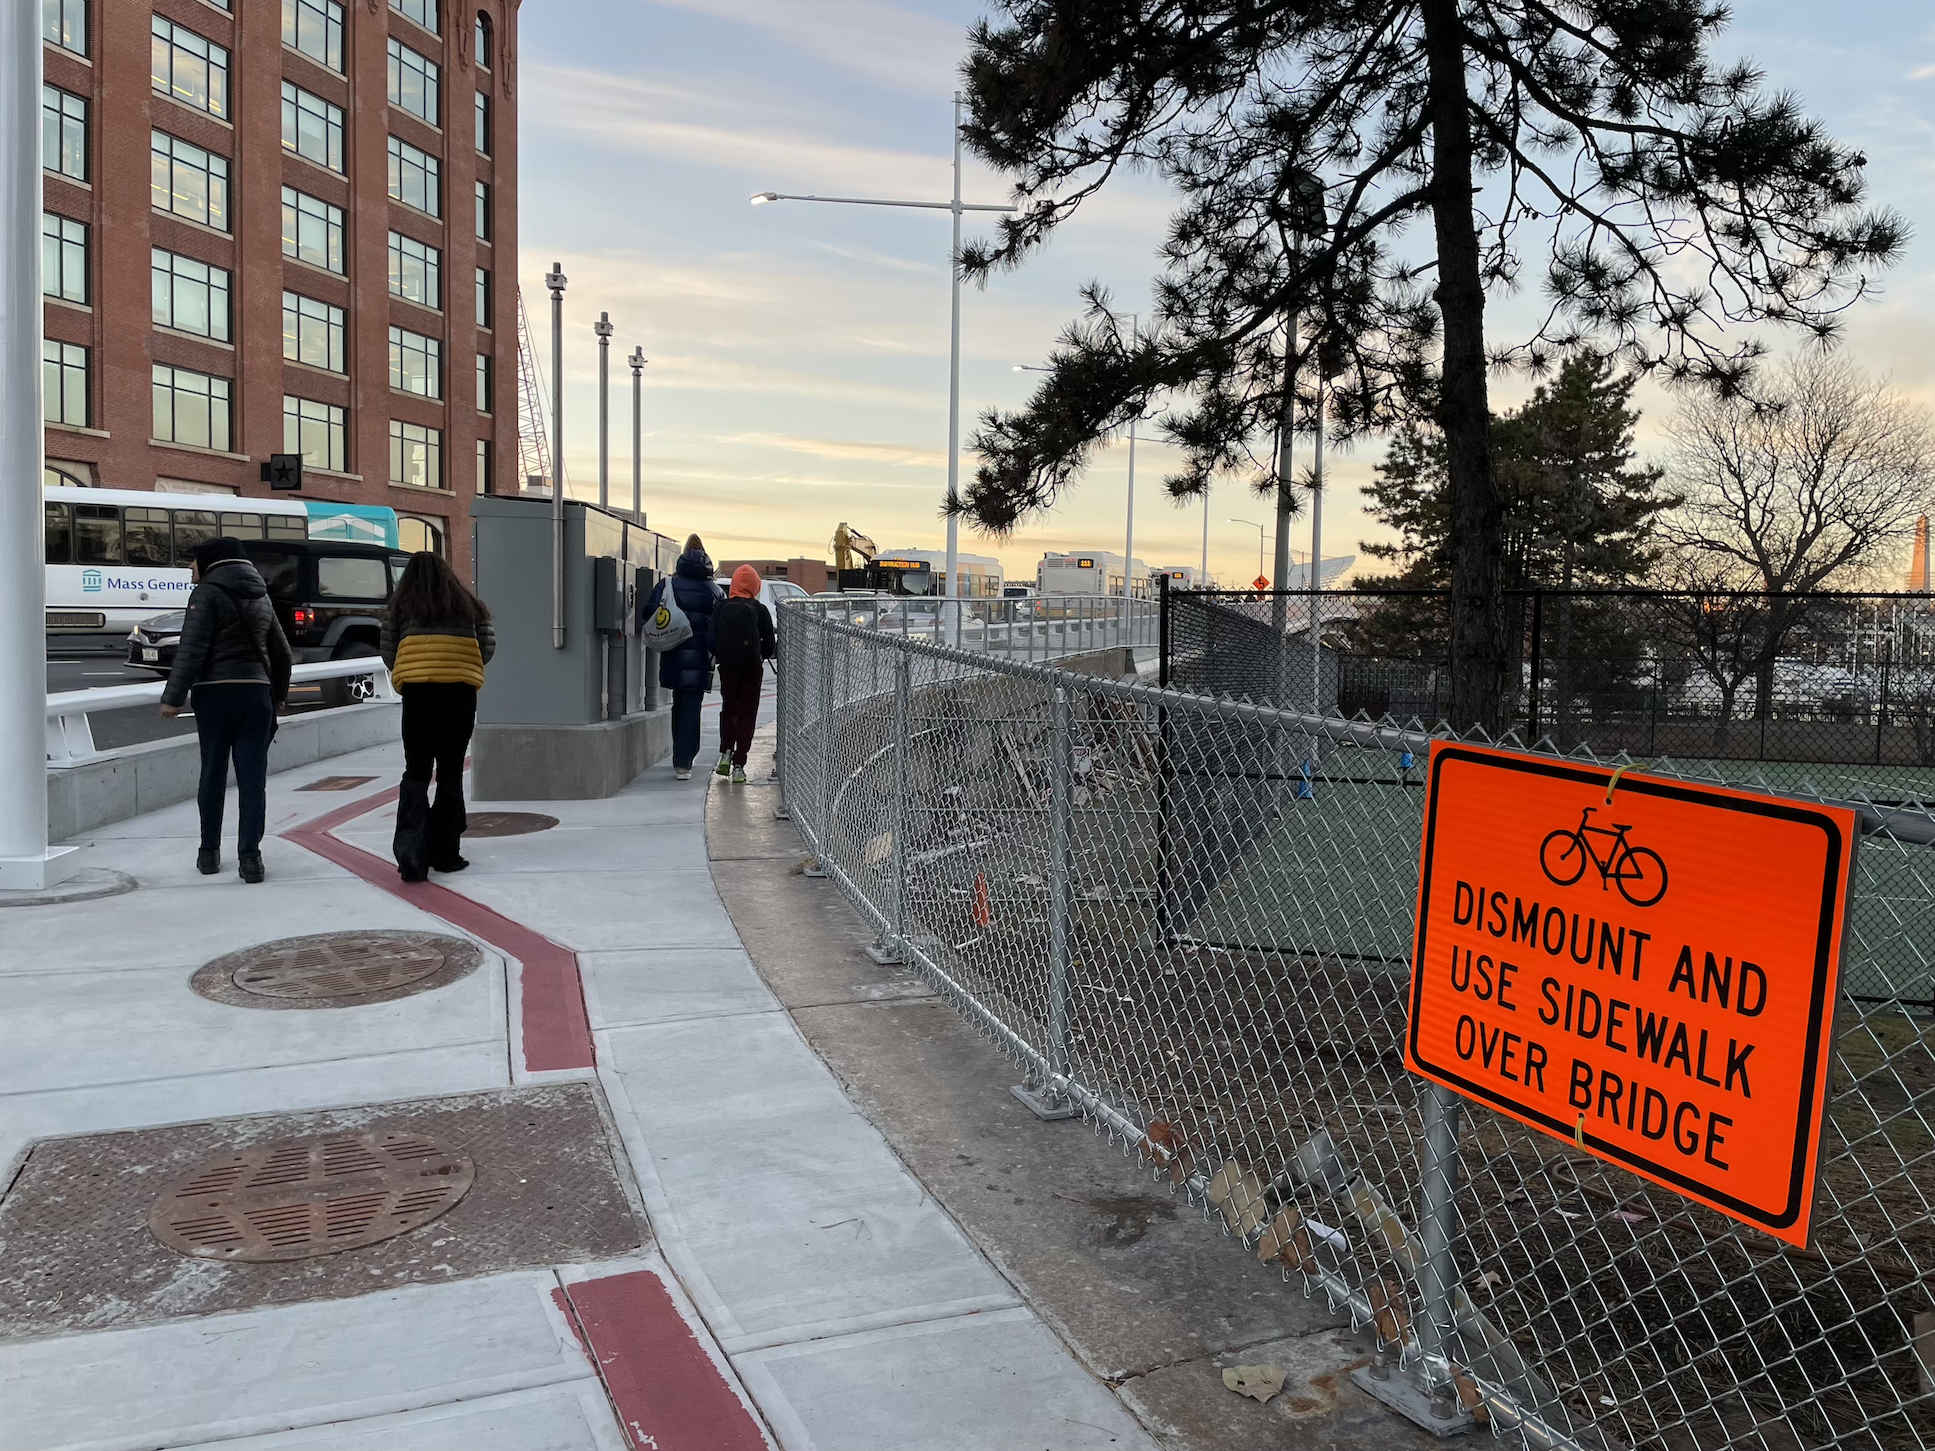 An orange sign attached to a chain-link fence reads "DISMOUNT AND USE SIDEWALK OVER BRIDGE" under a bike icon. To its left, several pedestrians walk on a sidewalk towards a bridge. In the middle of the sidewalk is a red stripe that denotes the Freedom Trail. Several pine trees are on the other side of the chain-link fence.